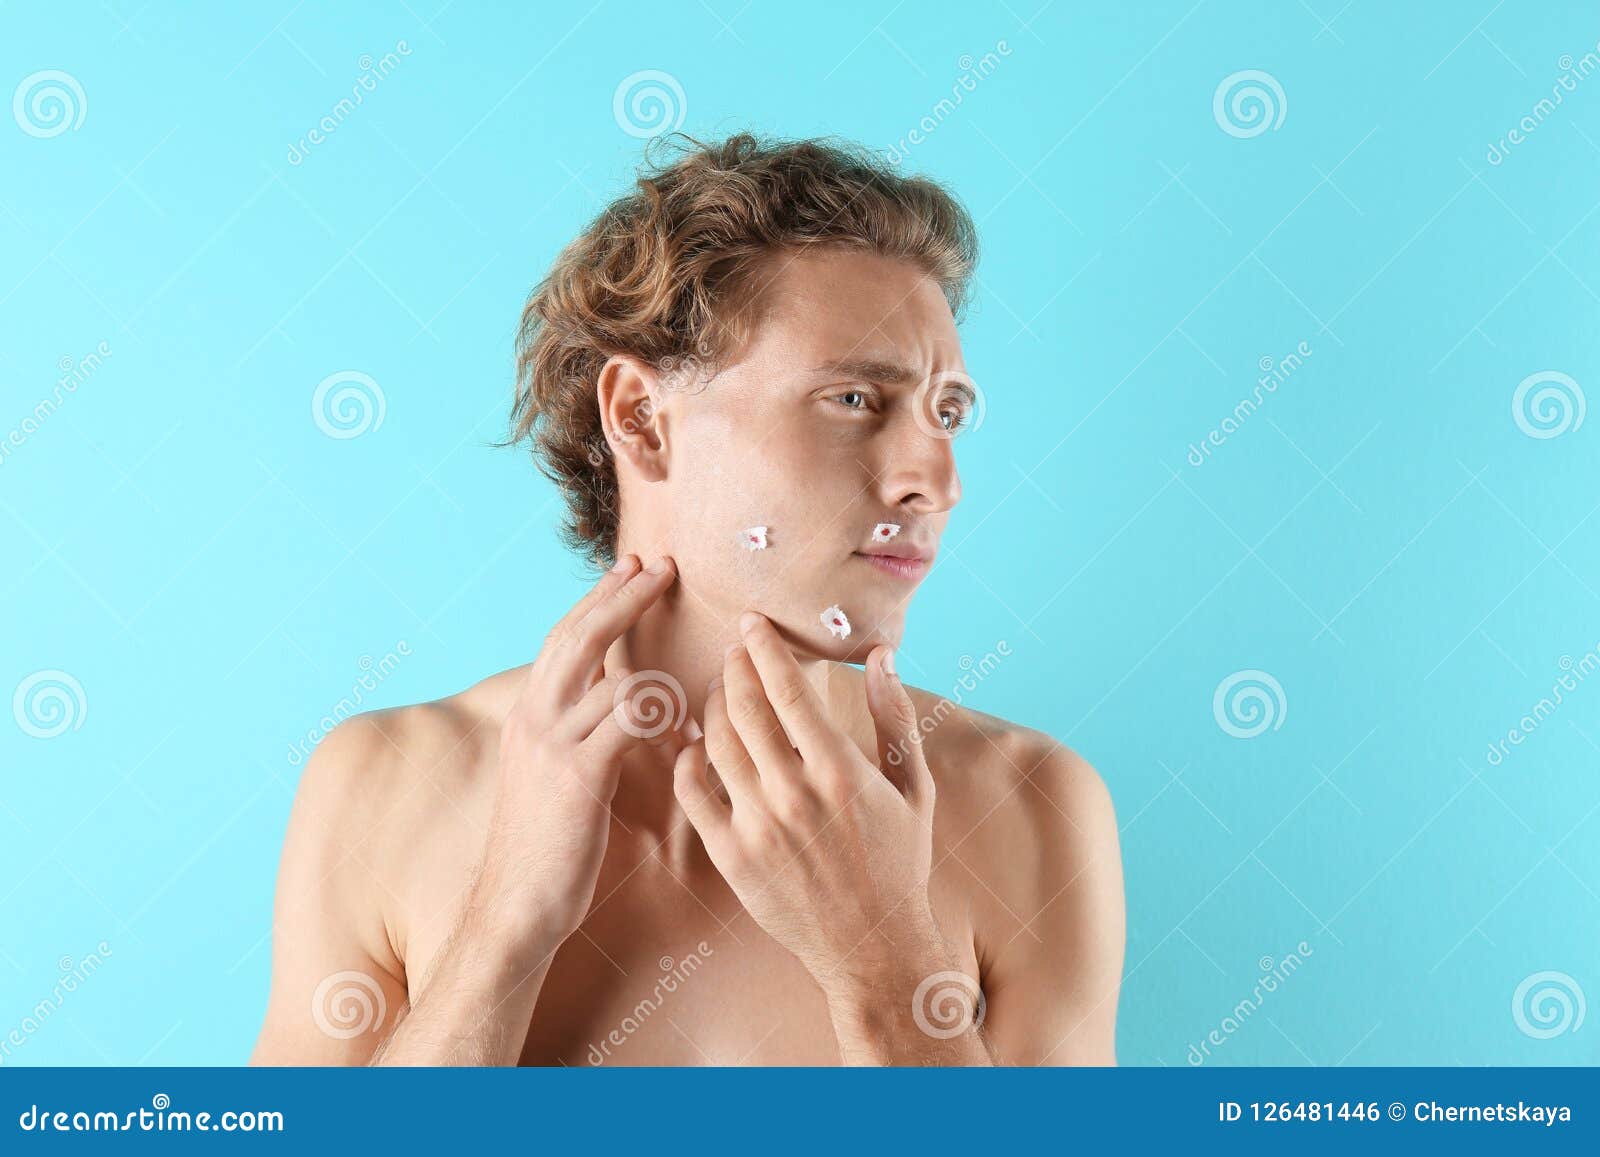 Young Man With Face Hurt While Shaving Stock Photo Image Of